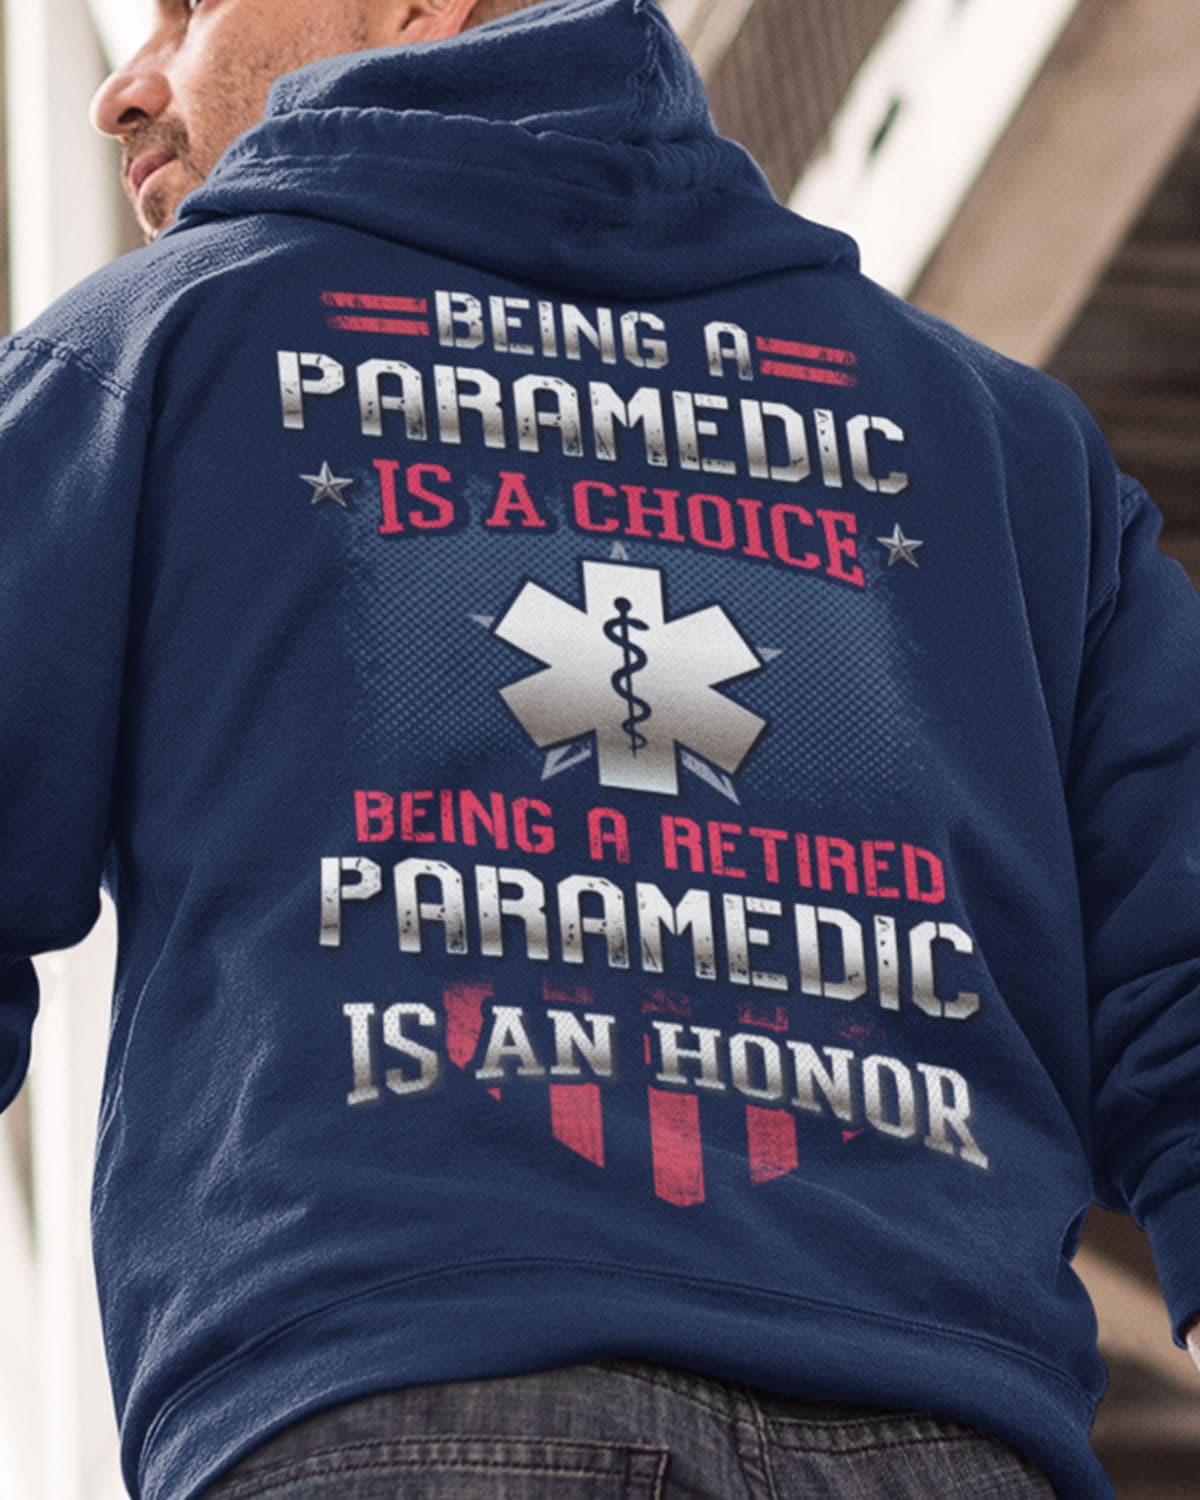 Being a paramedic is a choice, being a retired paramedic is an honor ...